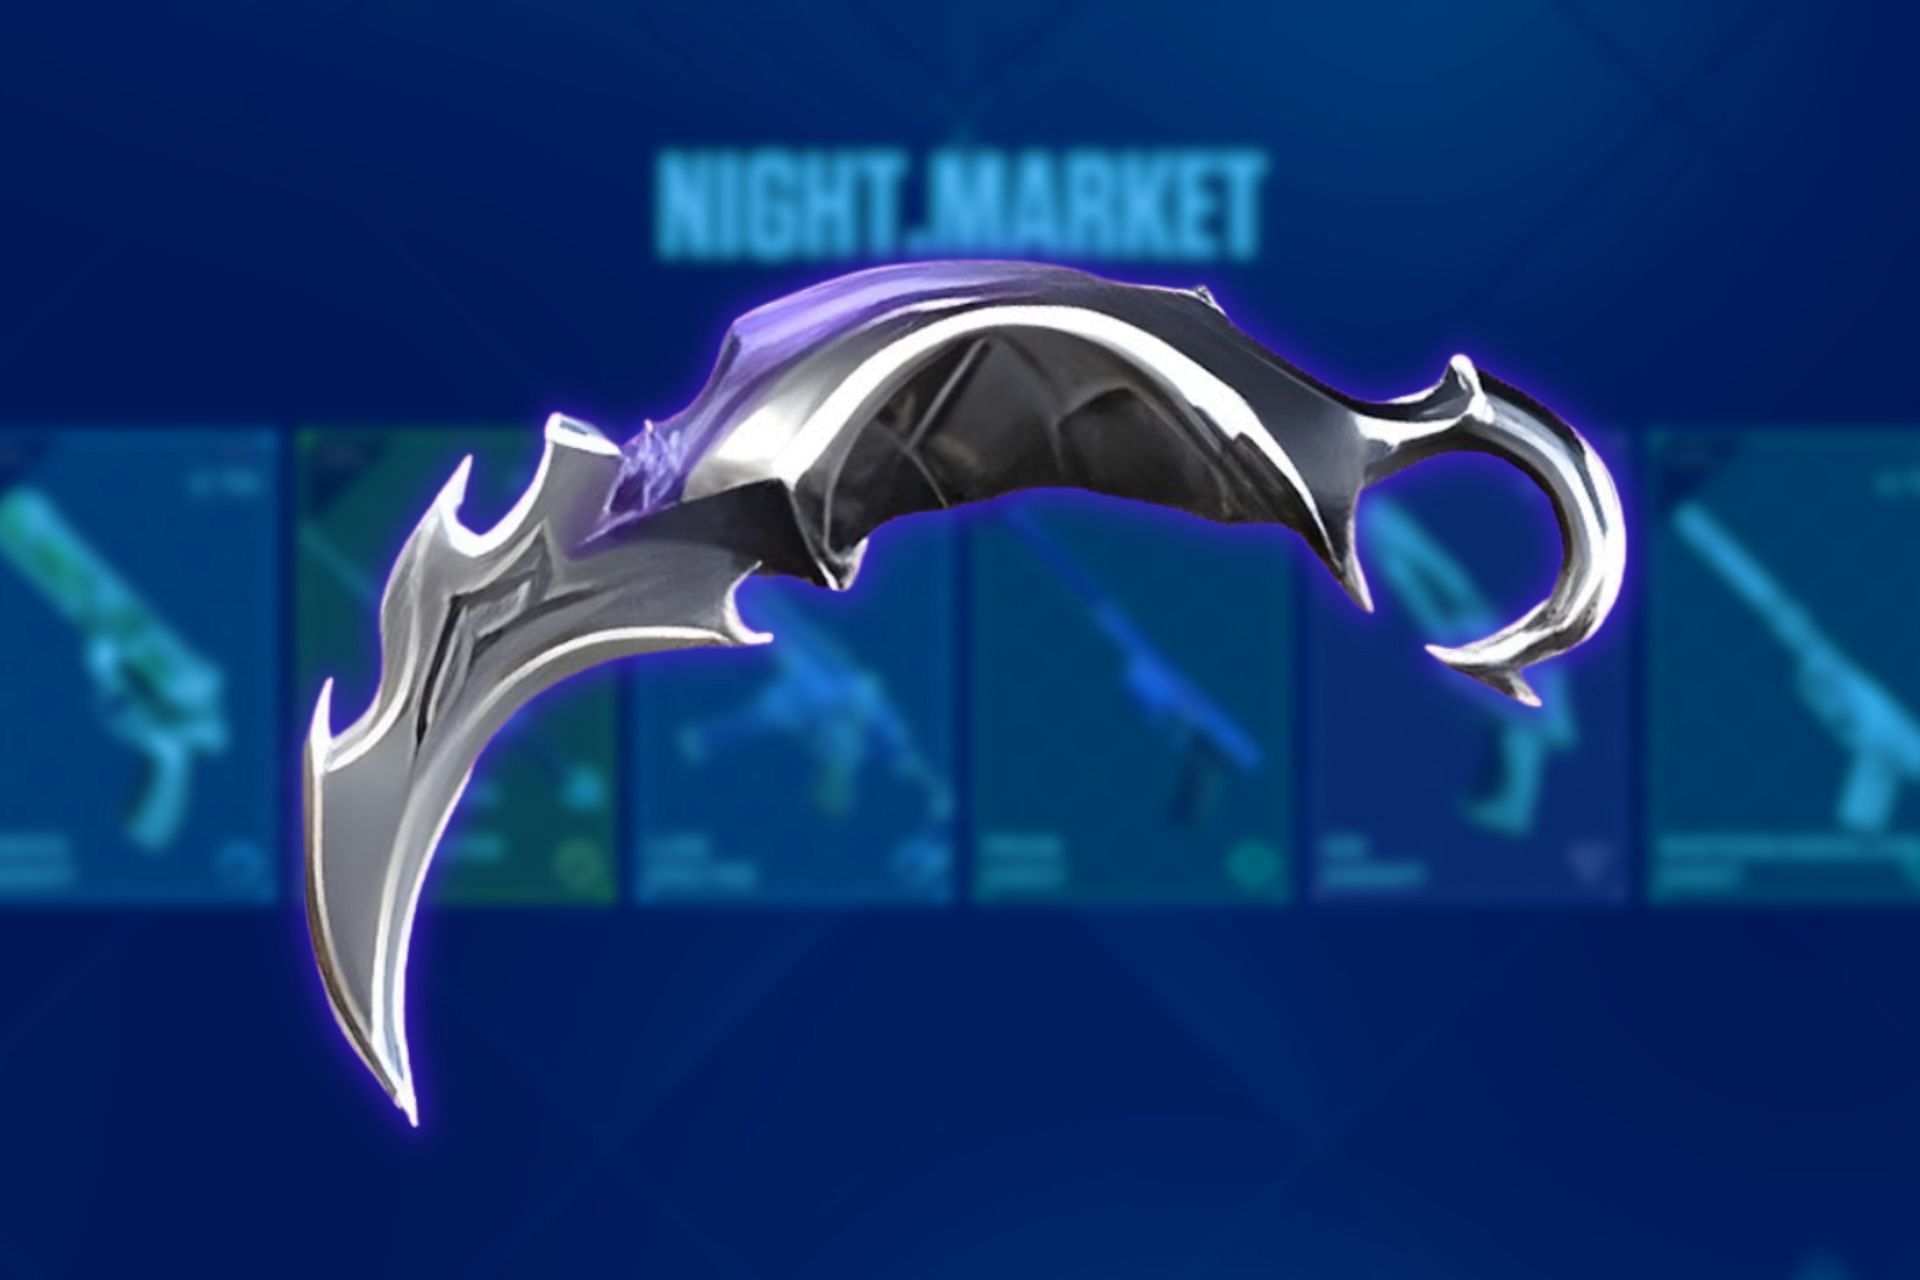 Valorant&#039;s Reaver 2.0 Karambit could be available in Night Market according to a leak (Image via Sportskeeda)